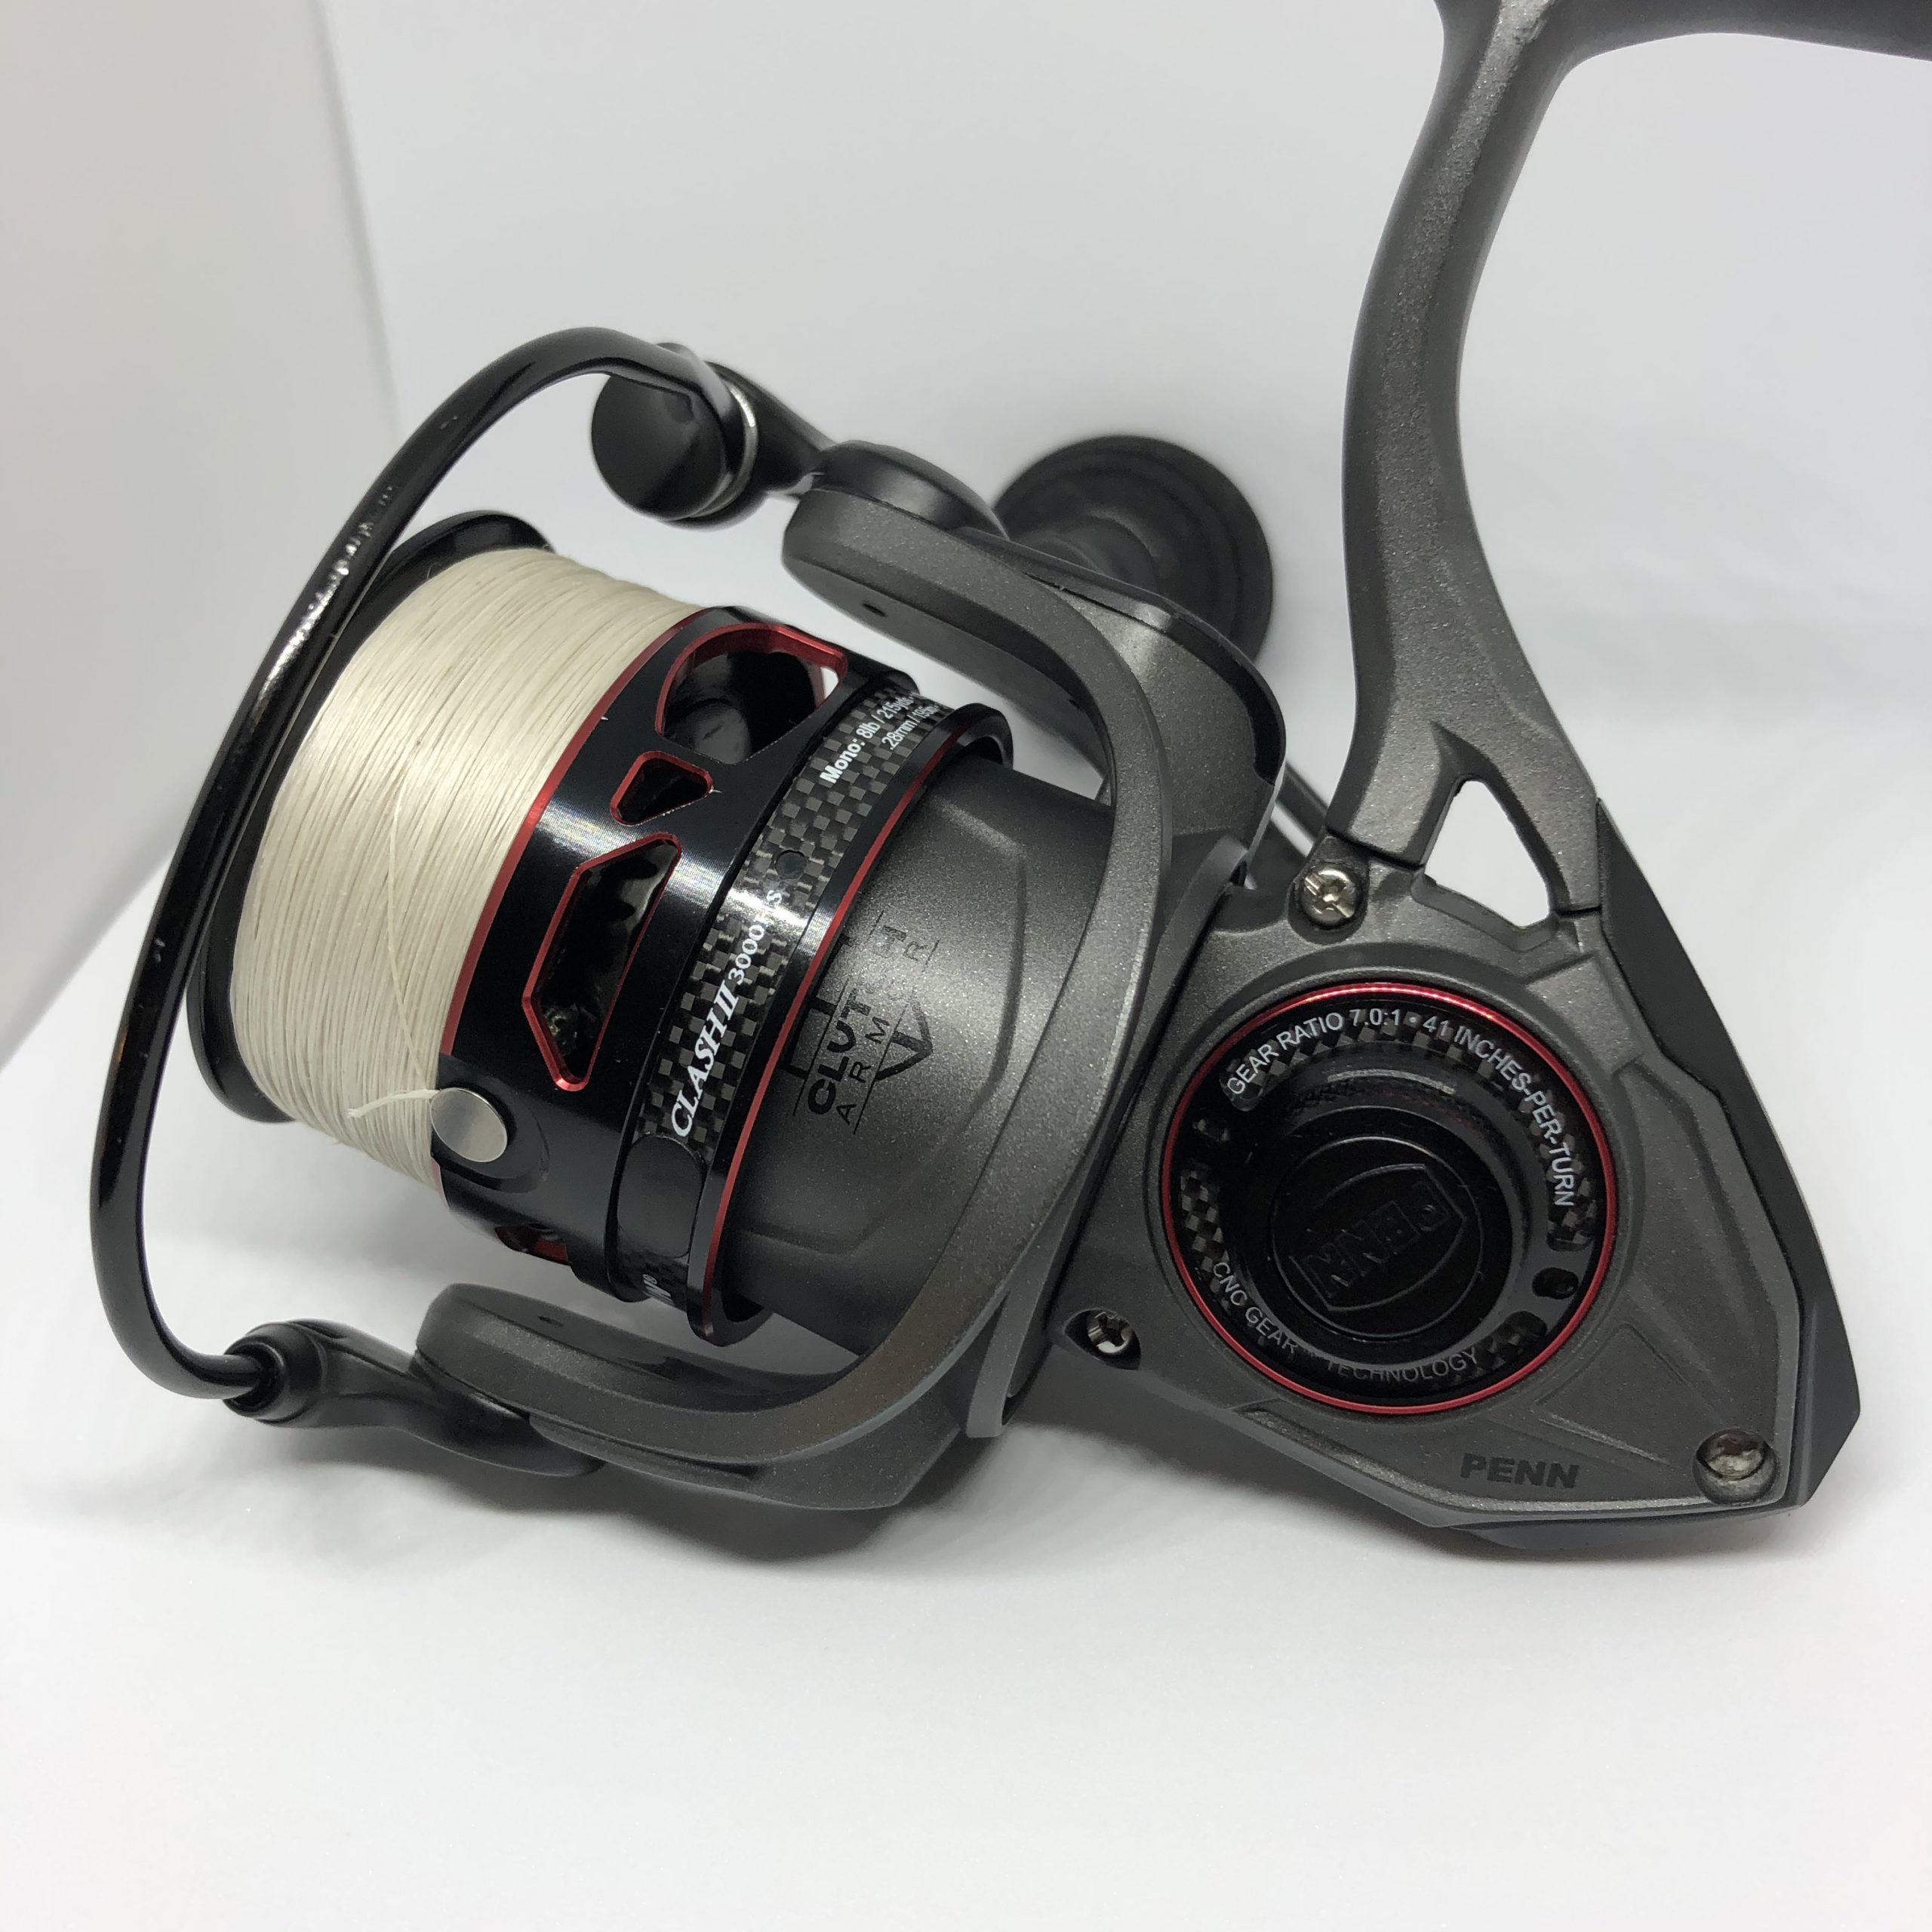 PENN Clash II Spinning Reel Review - Wrightsville Beach Fishing